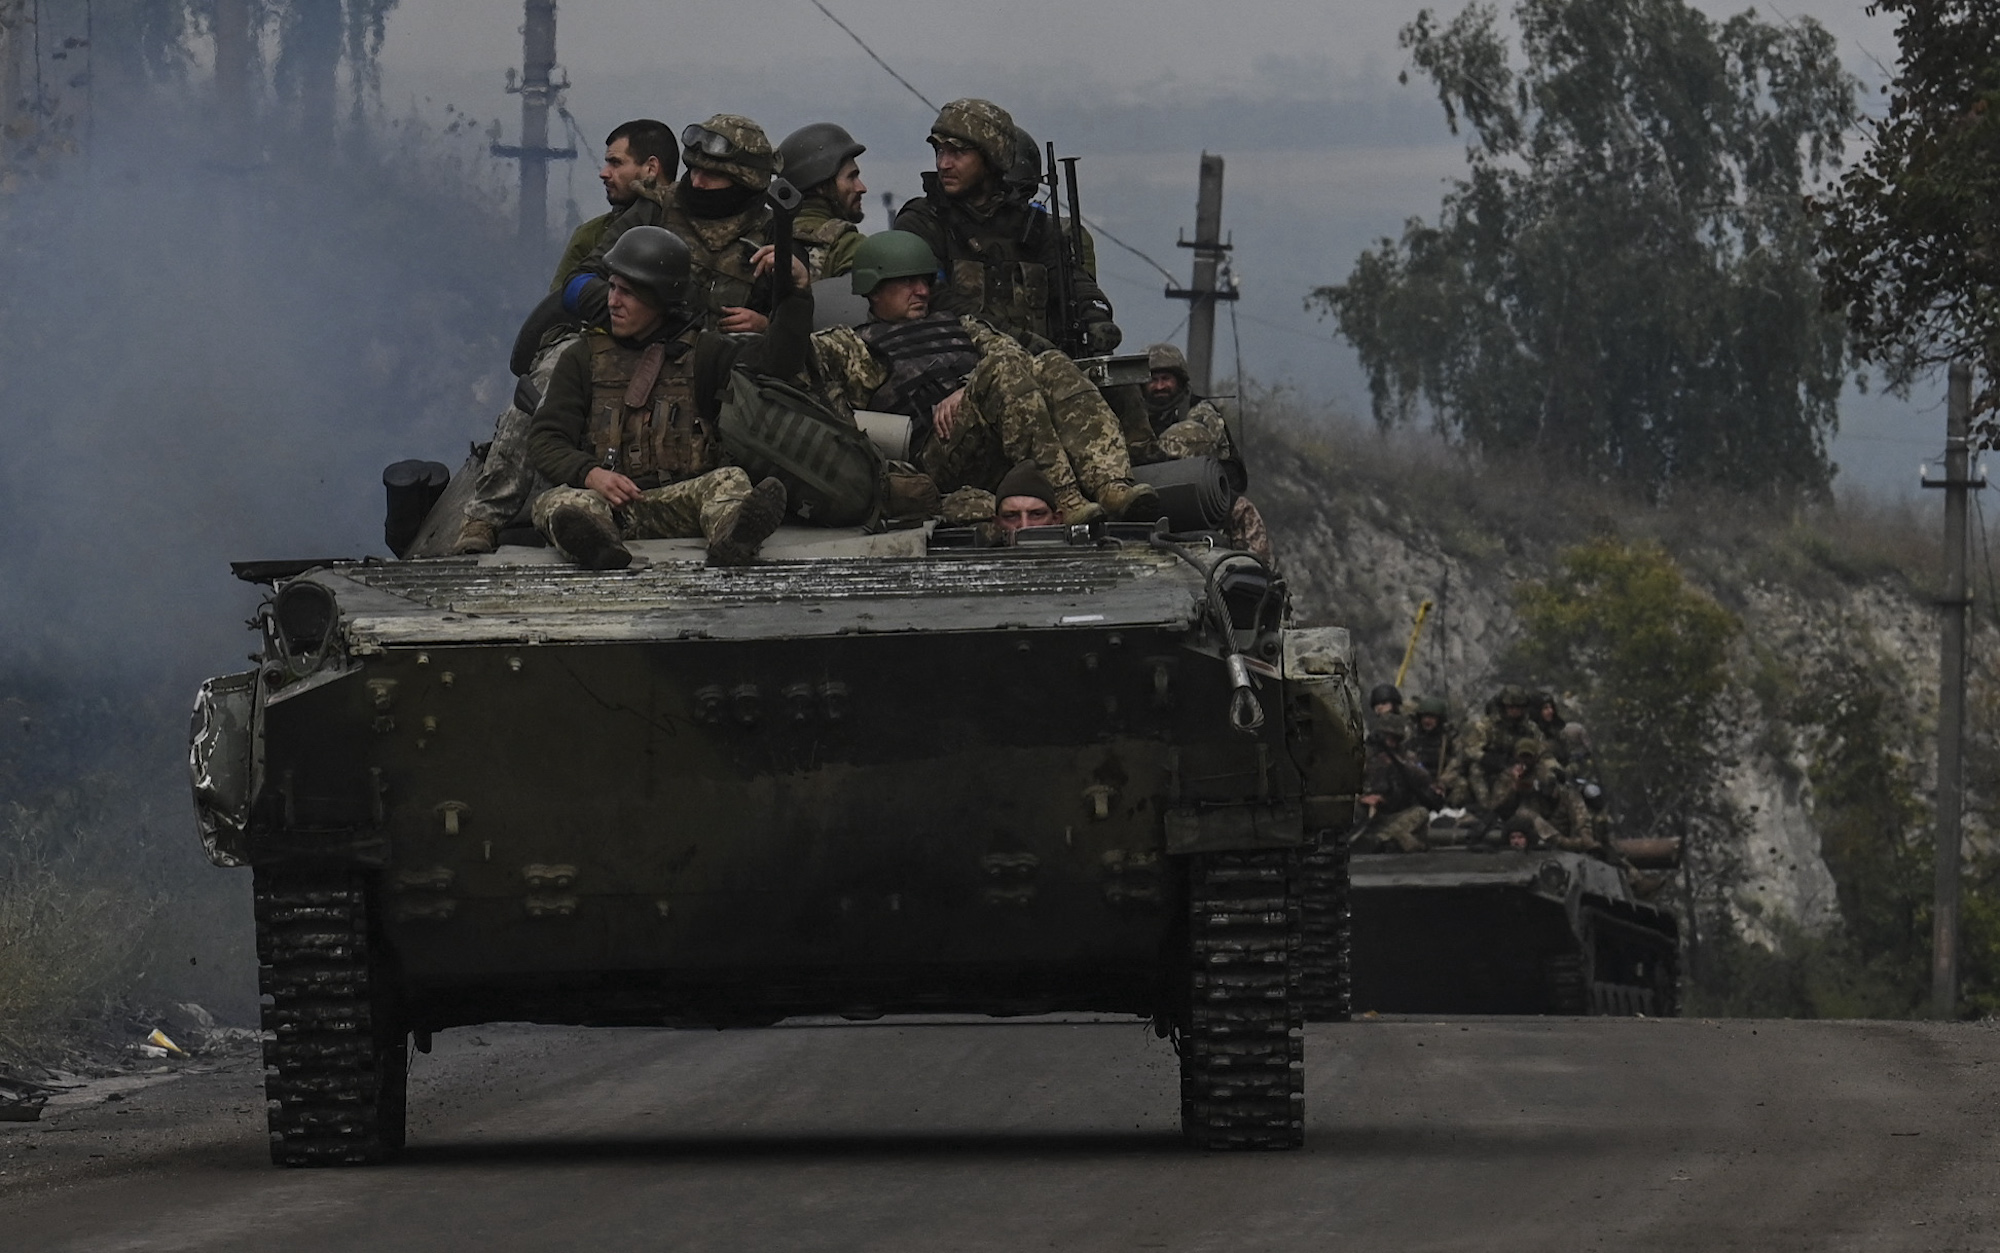 Ukrainian soldiers sit on infantry vehicles as they drive near Izium in Kharkiv Oblast on September 16.